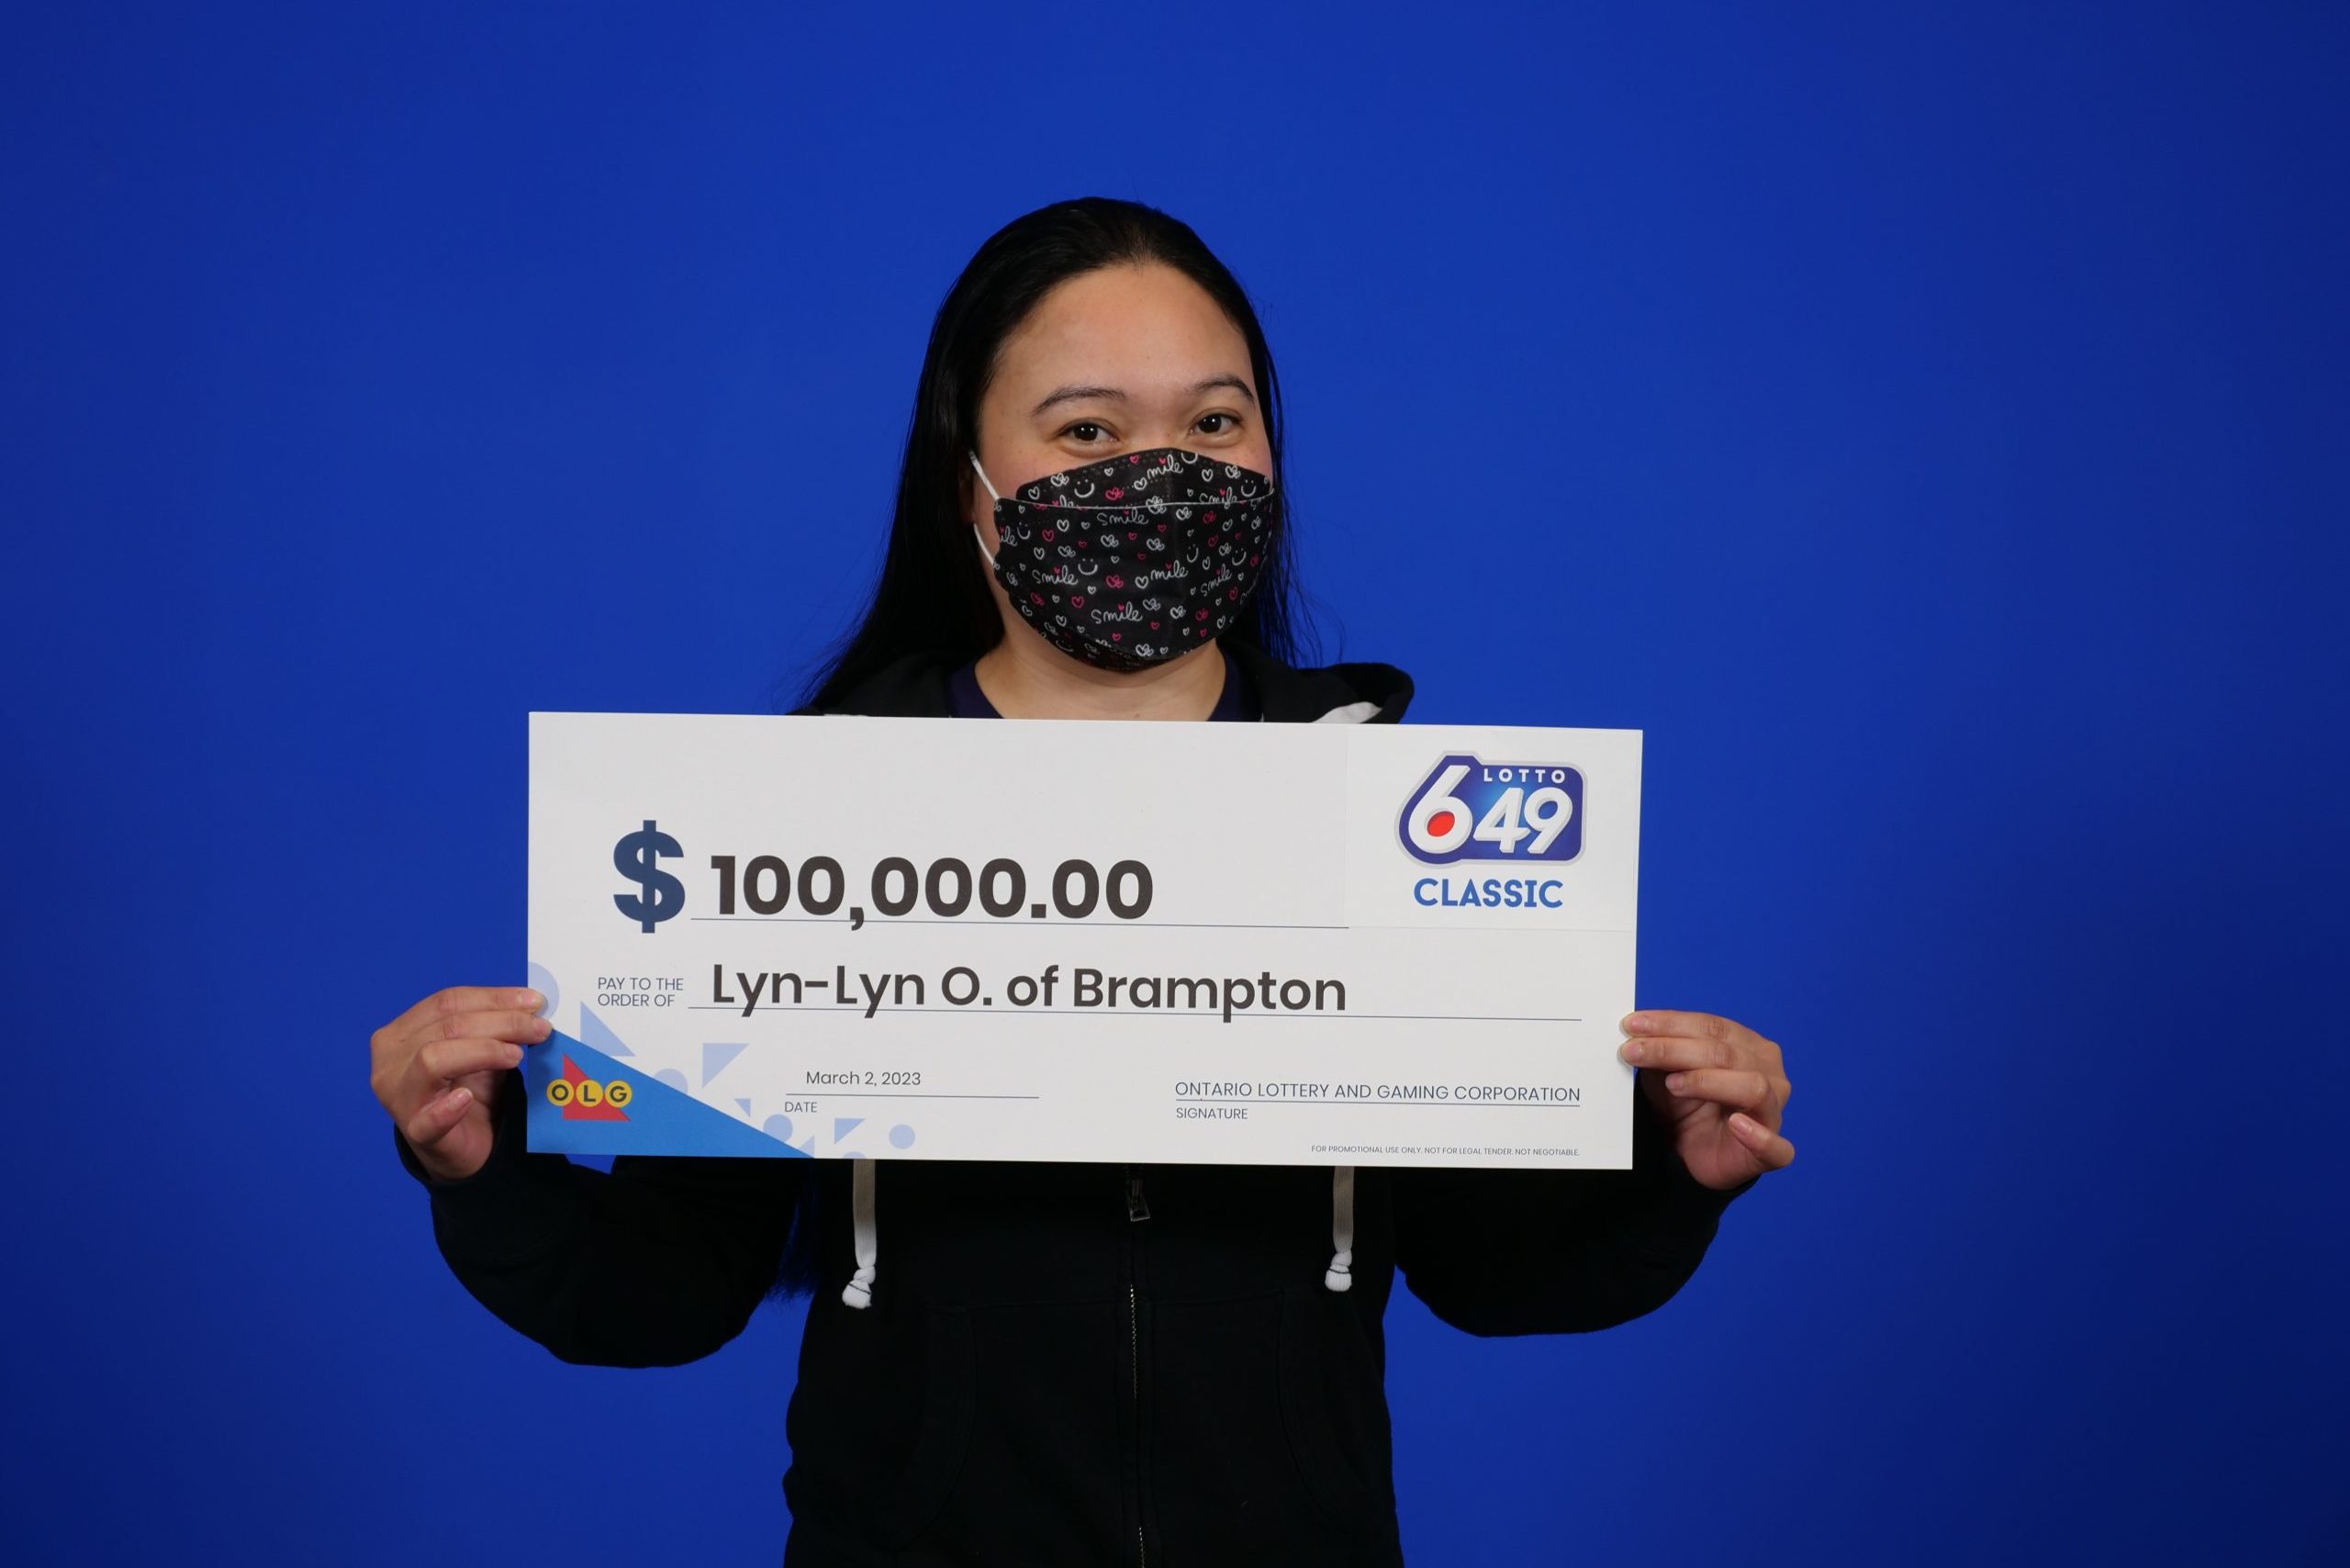 Dream trip comes true because of Brampton lady’s 0,000 lottery win